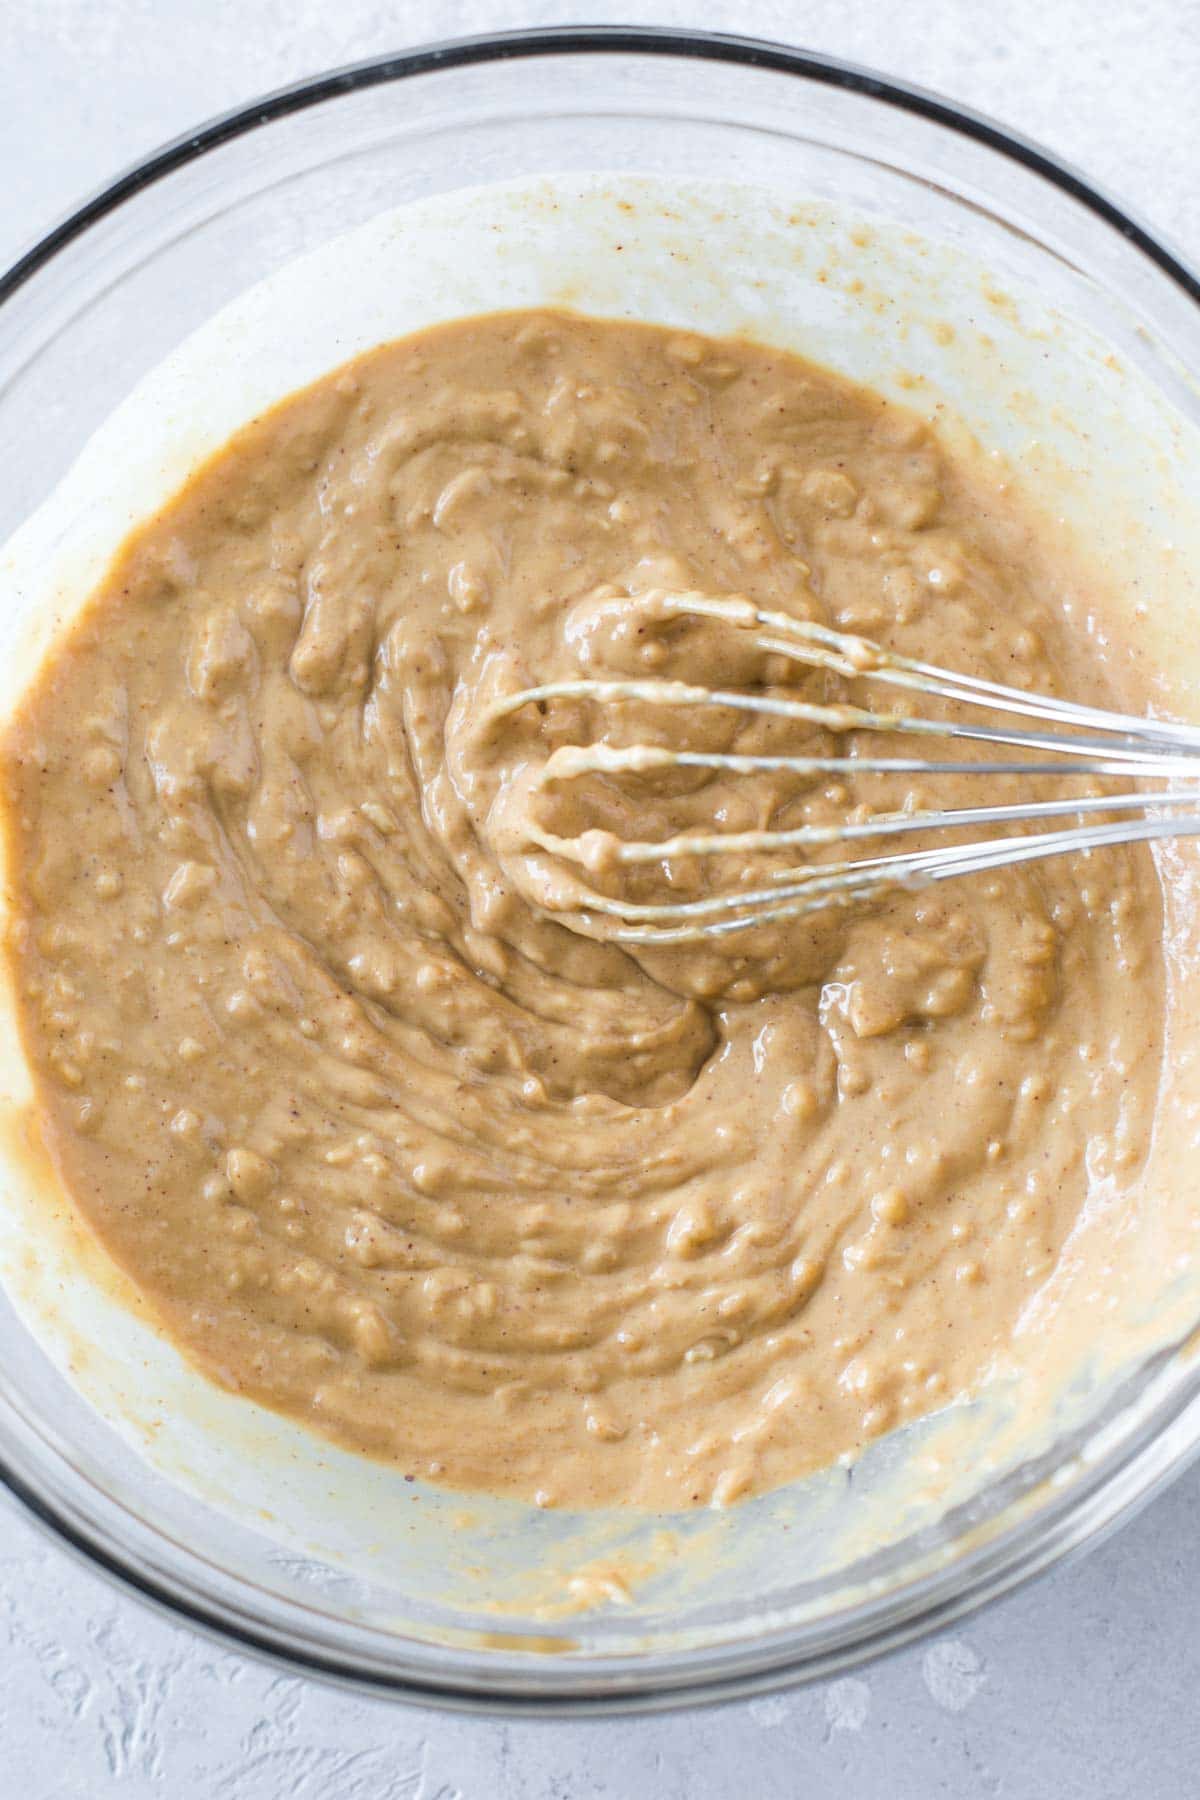 thai peanut sauce being whisked in a clear bowl on a gray painted surface